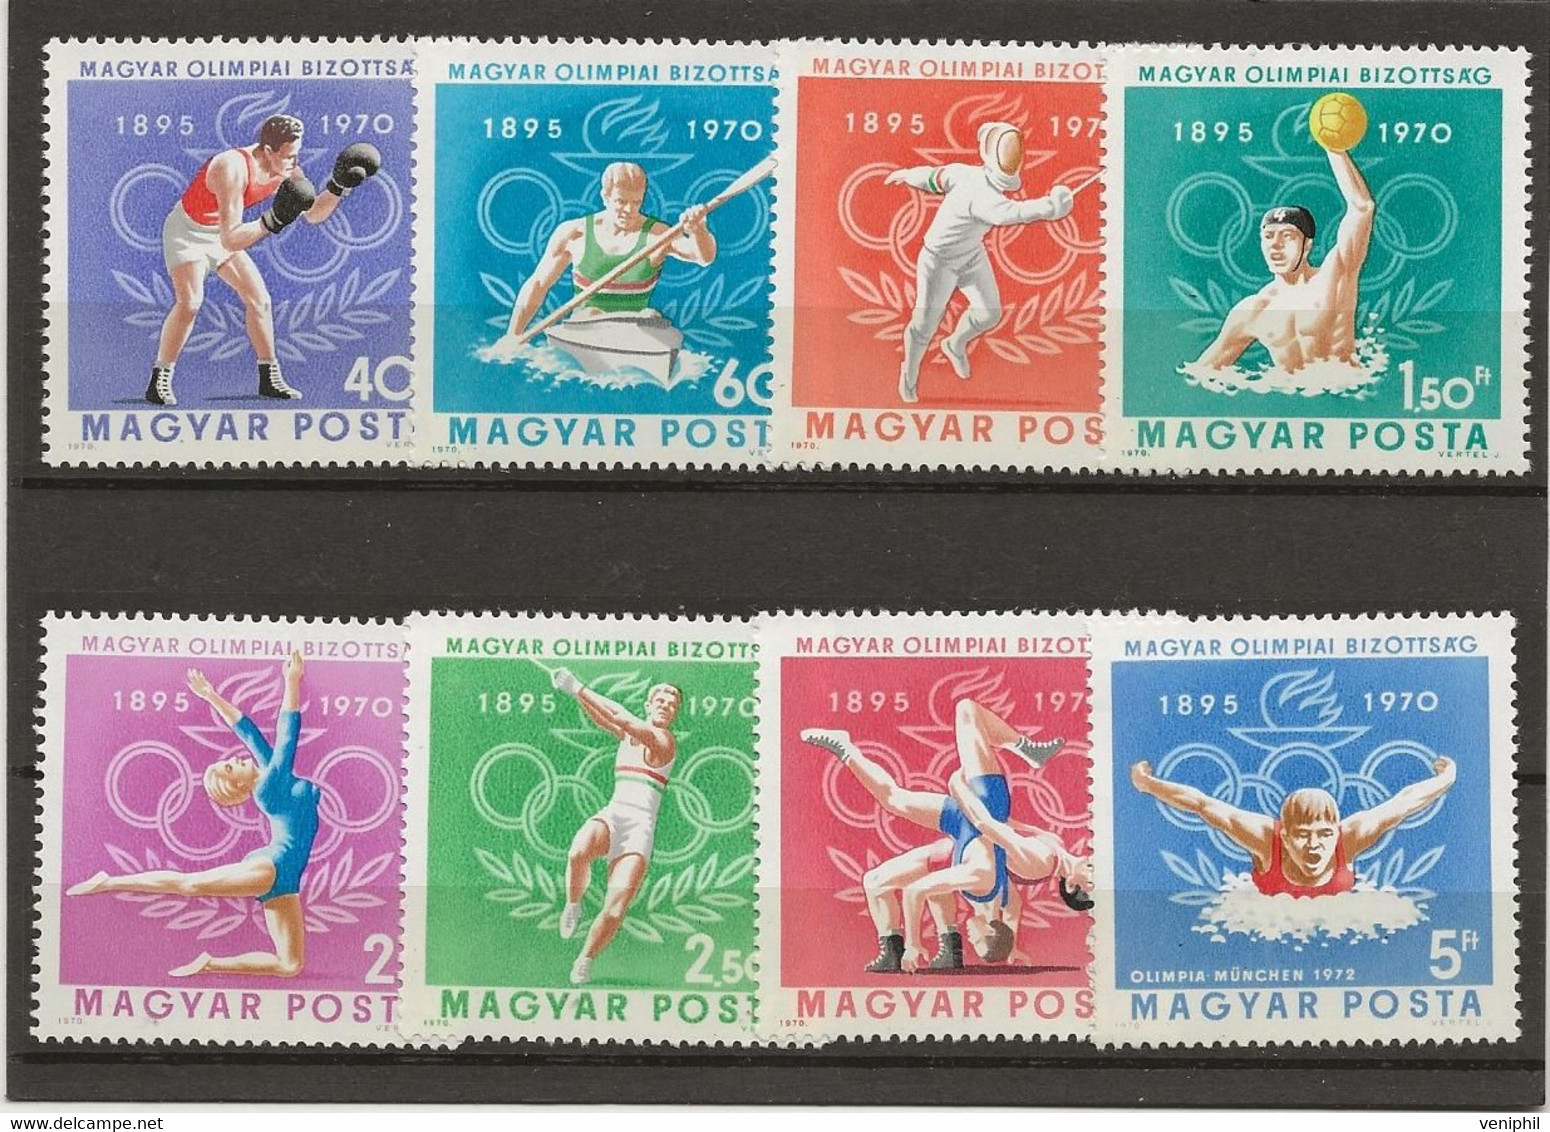 HONGRIE - SERIE SPORTS OLYMPIQUES  N° 2120 A 2127- NEUF INFIME CHARNIERE - ANNEE 1970 - Nuevos